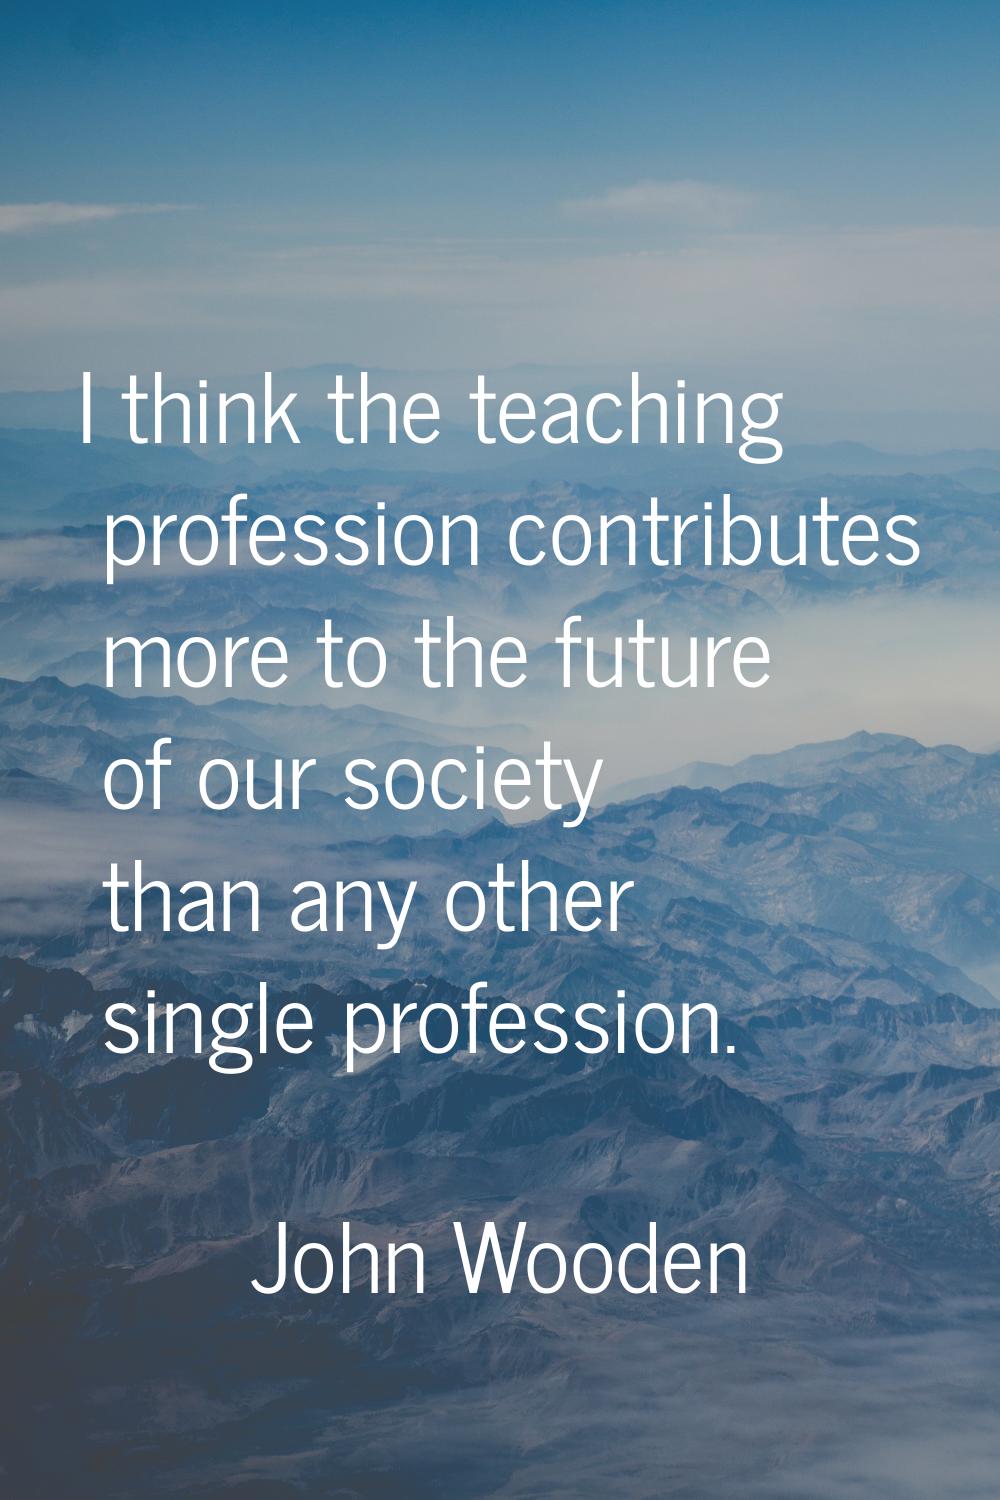 I think the teaching profession contributes more to the future of our society than any other single